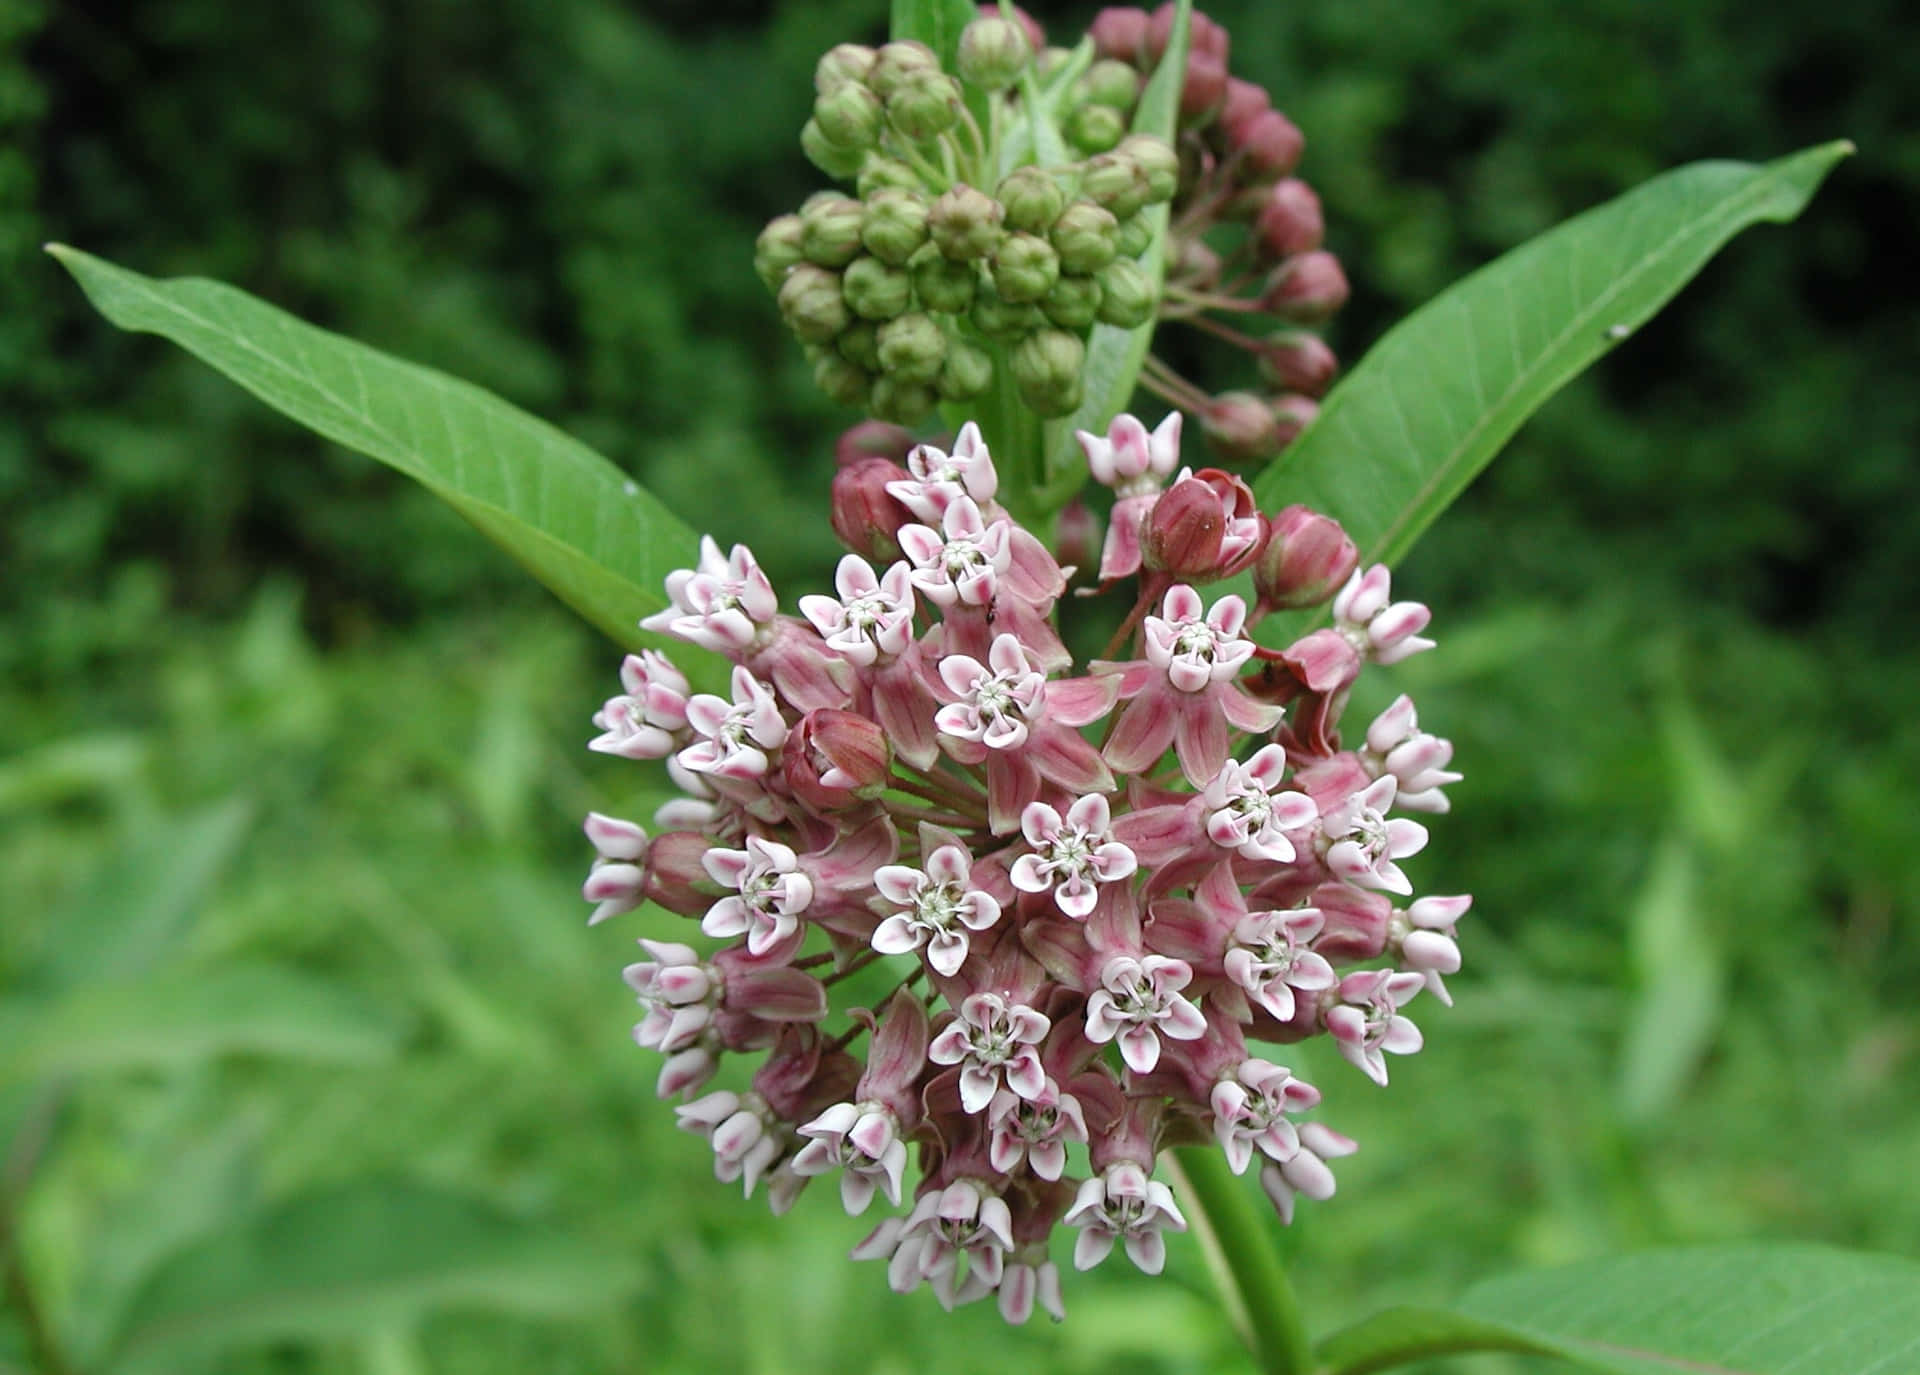 Wild Milkweed Plant among the Floral meadow